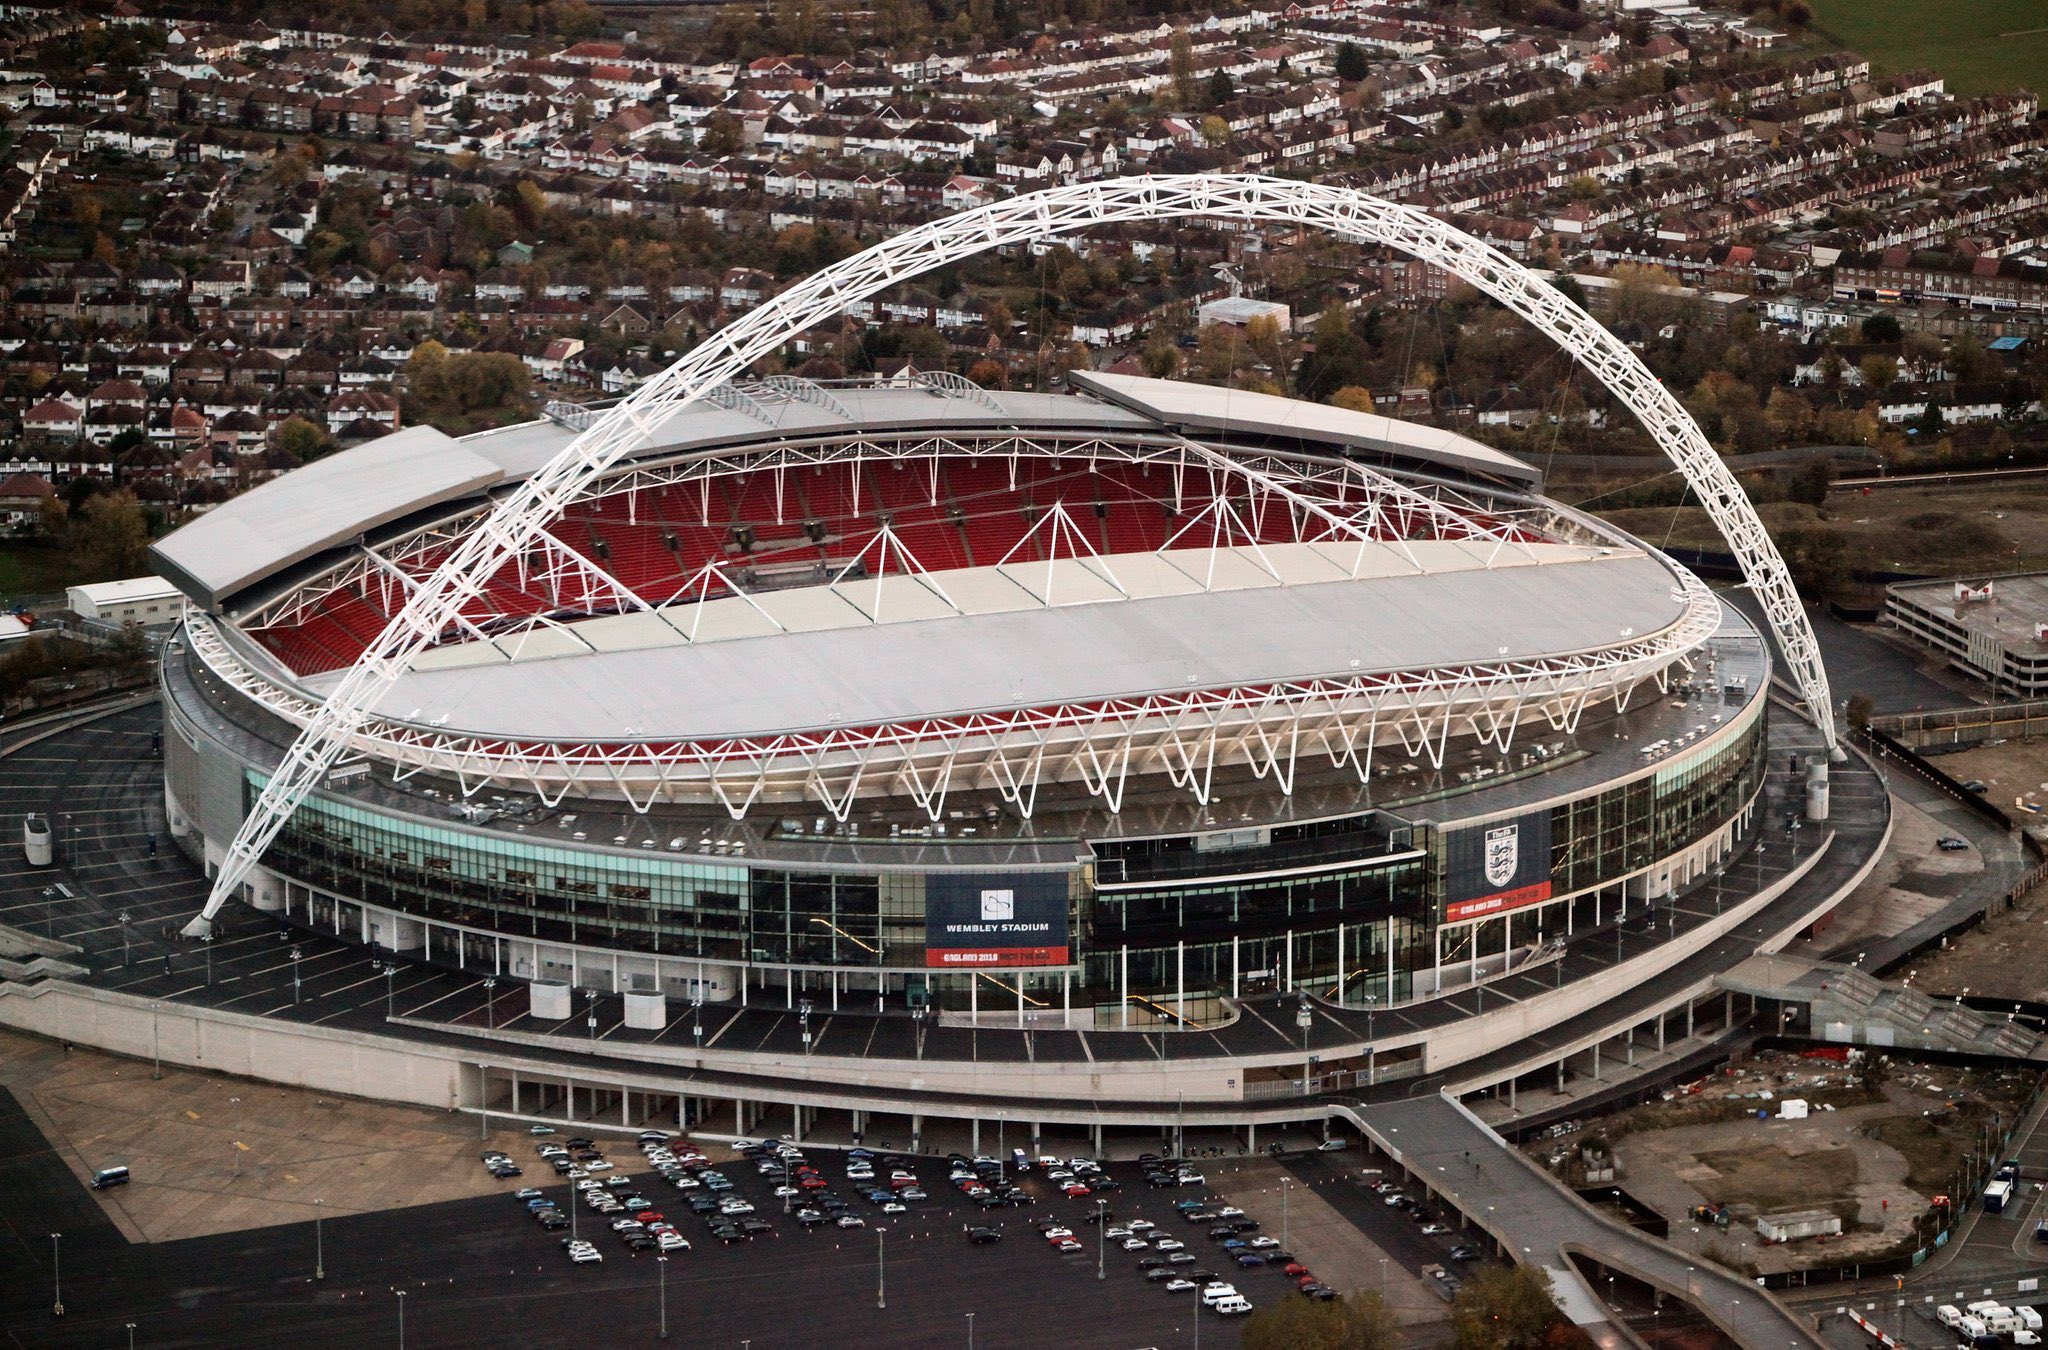 FA to sell Wembley to Fulham owner Shahid Khan for £800m